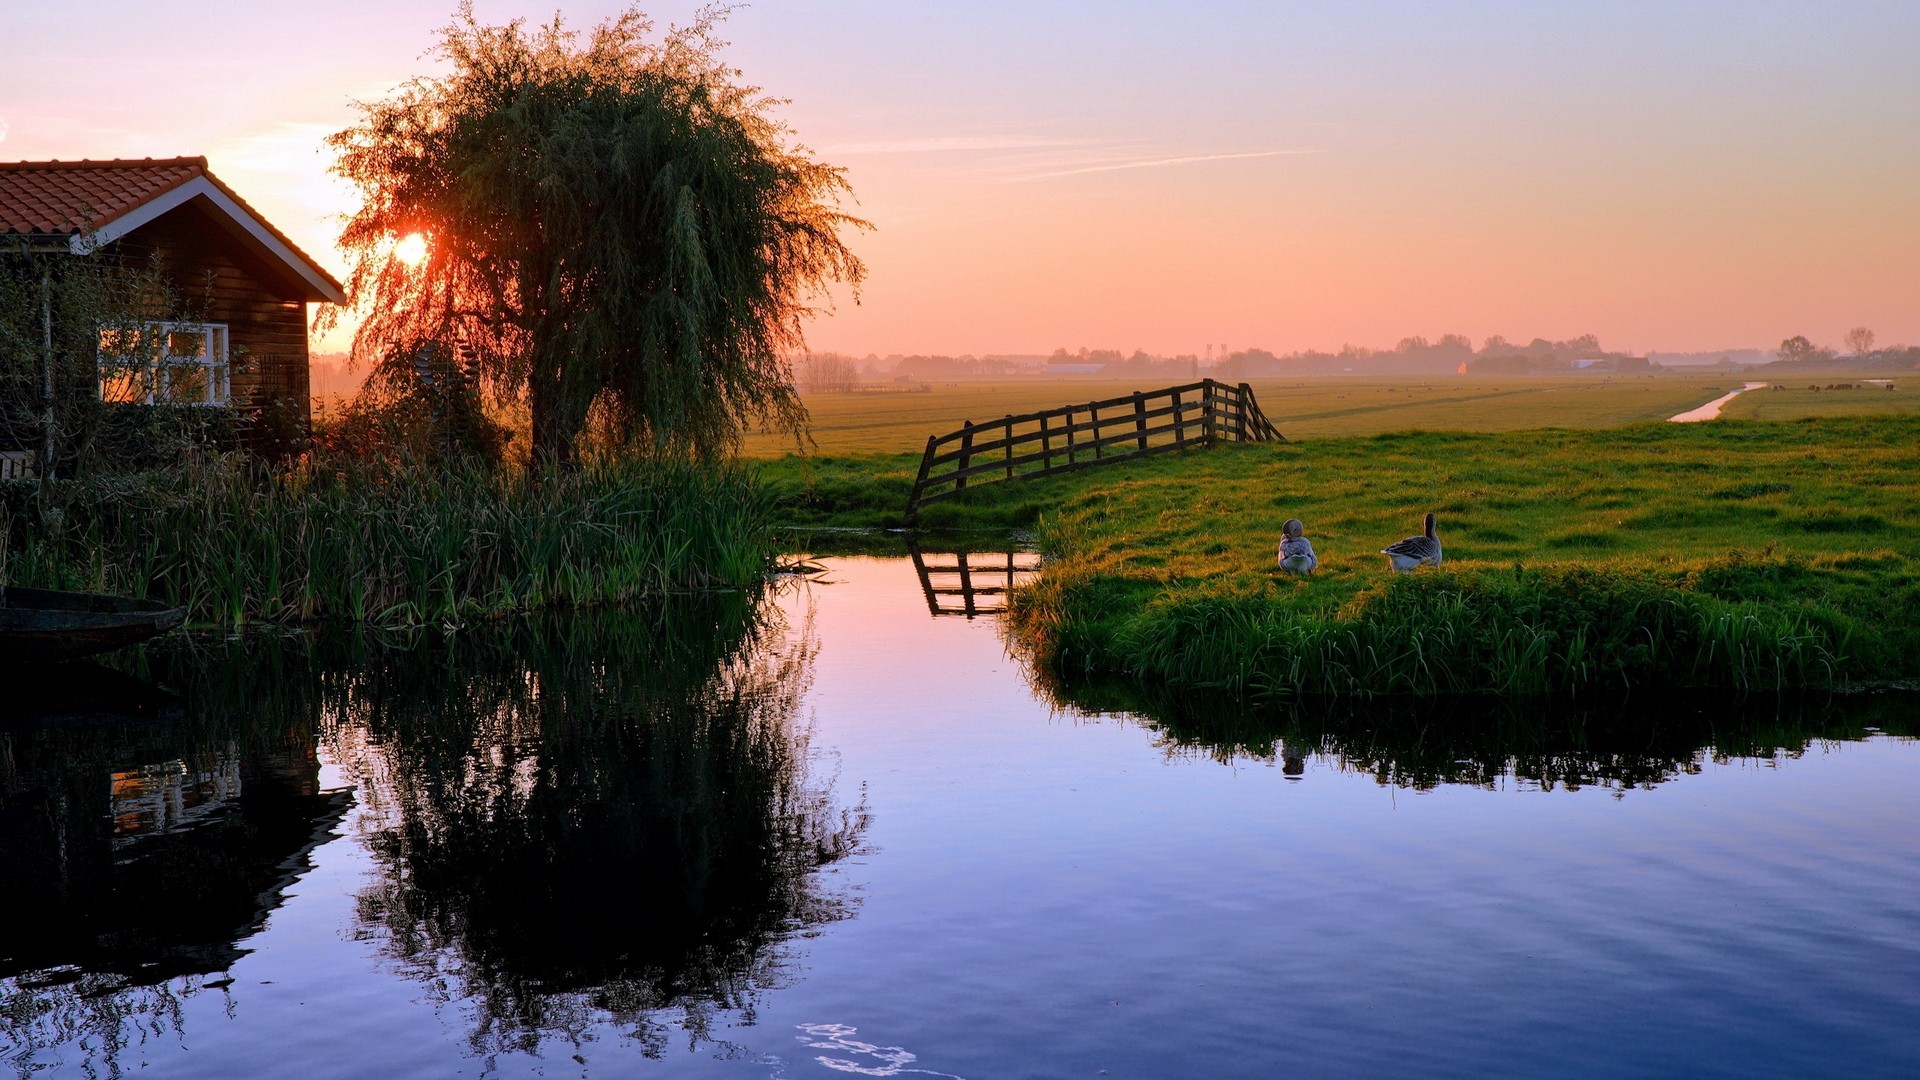 1920x1080 wallpapers: pond, house, sunset, ducks (image)